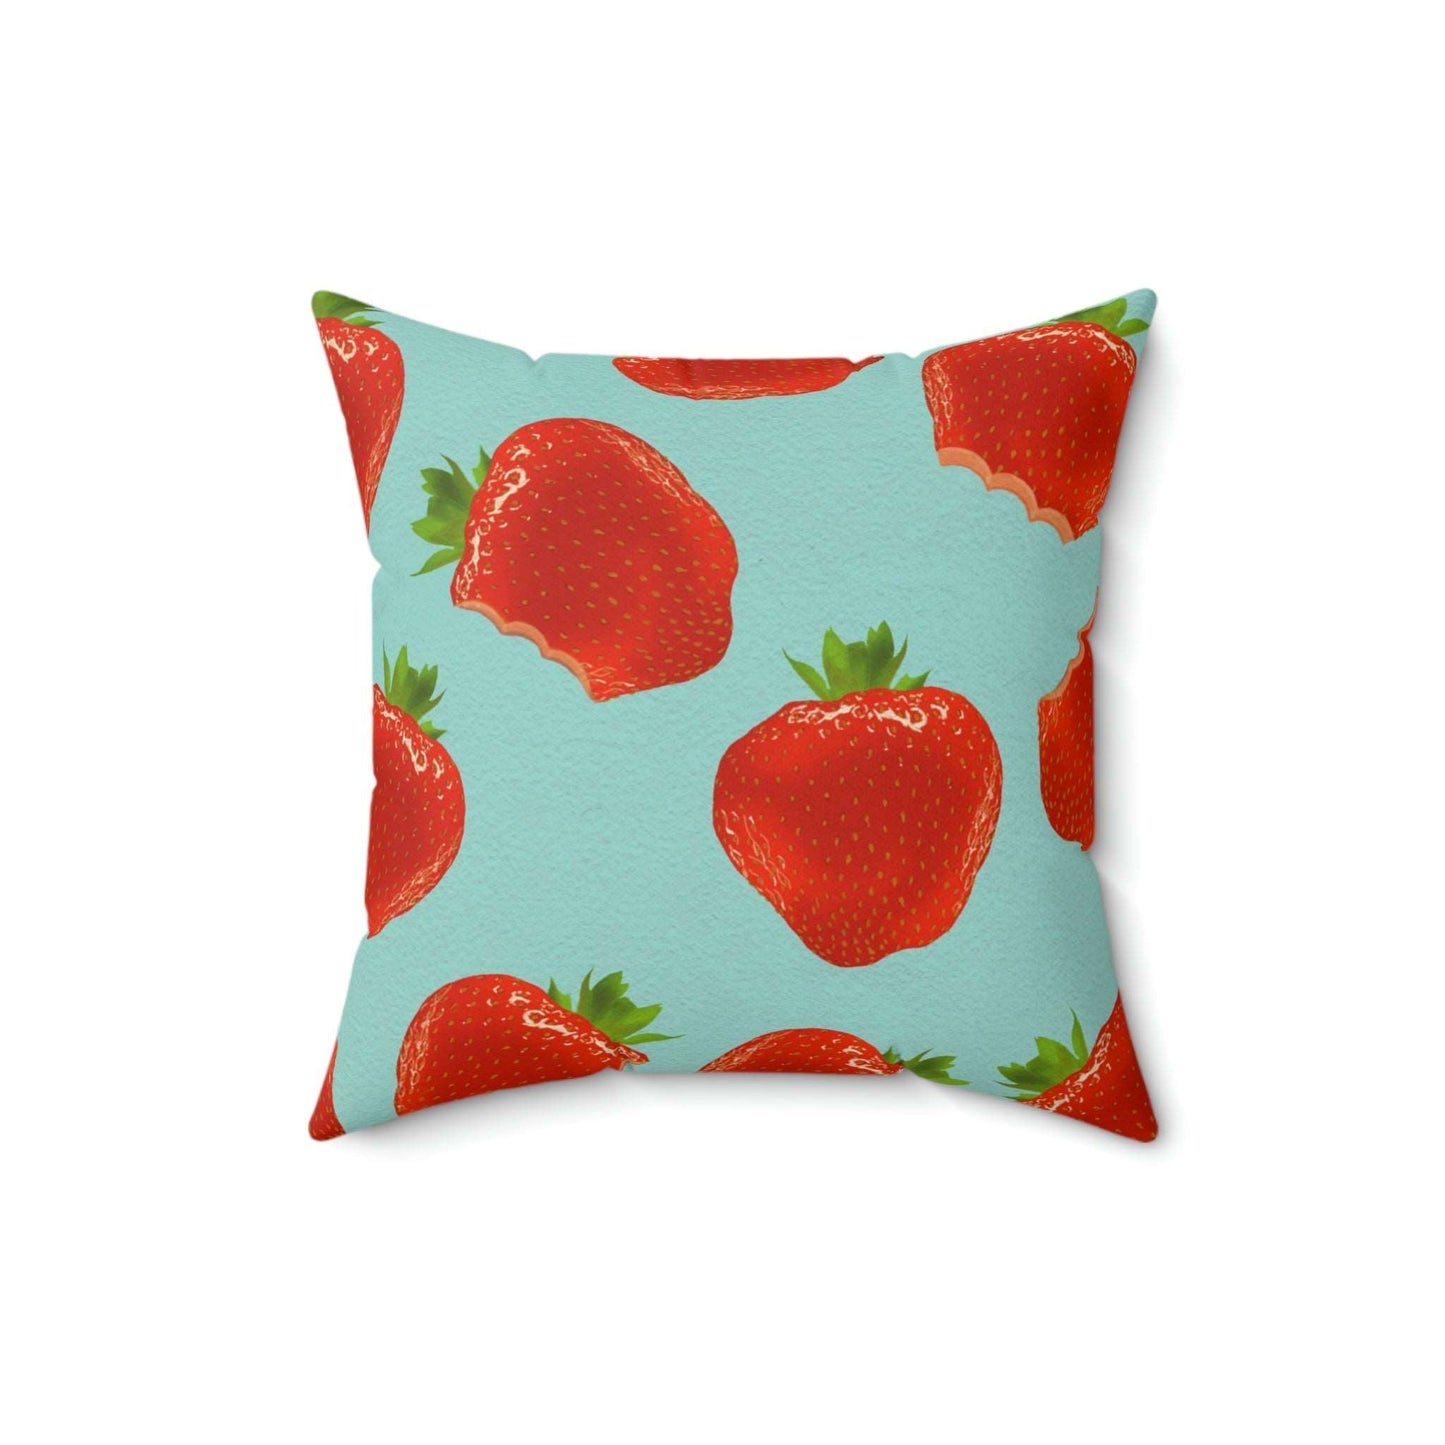 Bite My Strawberry Square Pillow Home Decor Pink Sweetheart